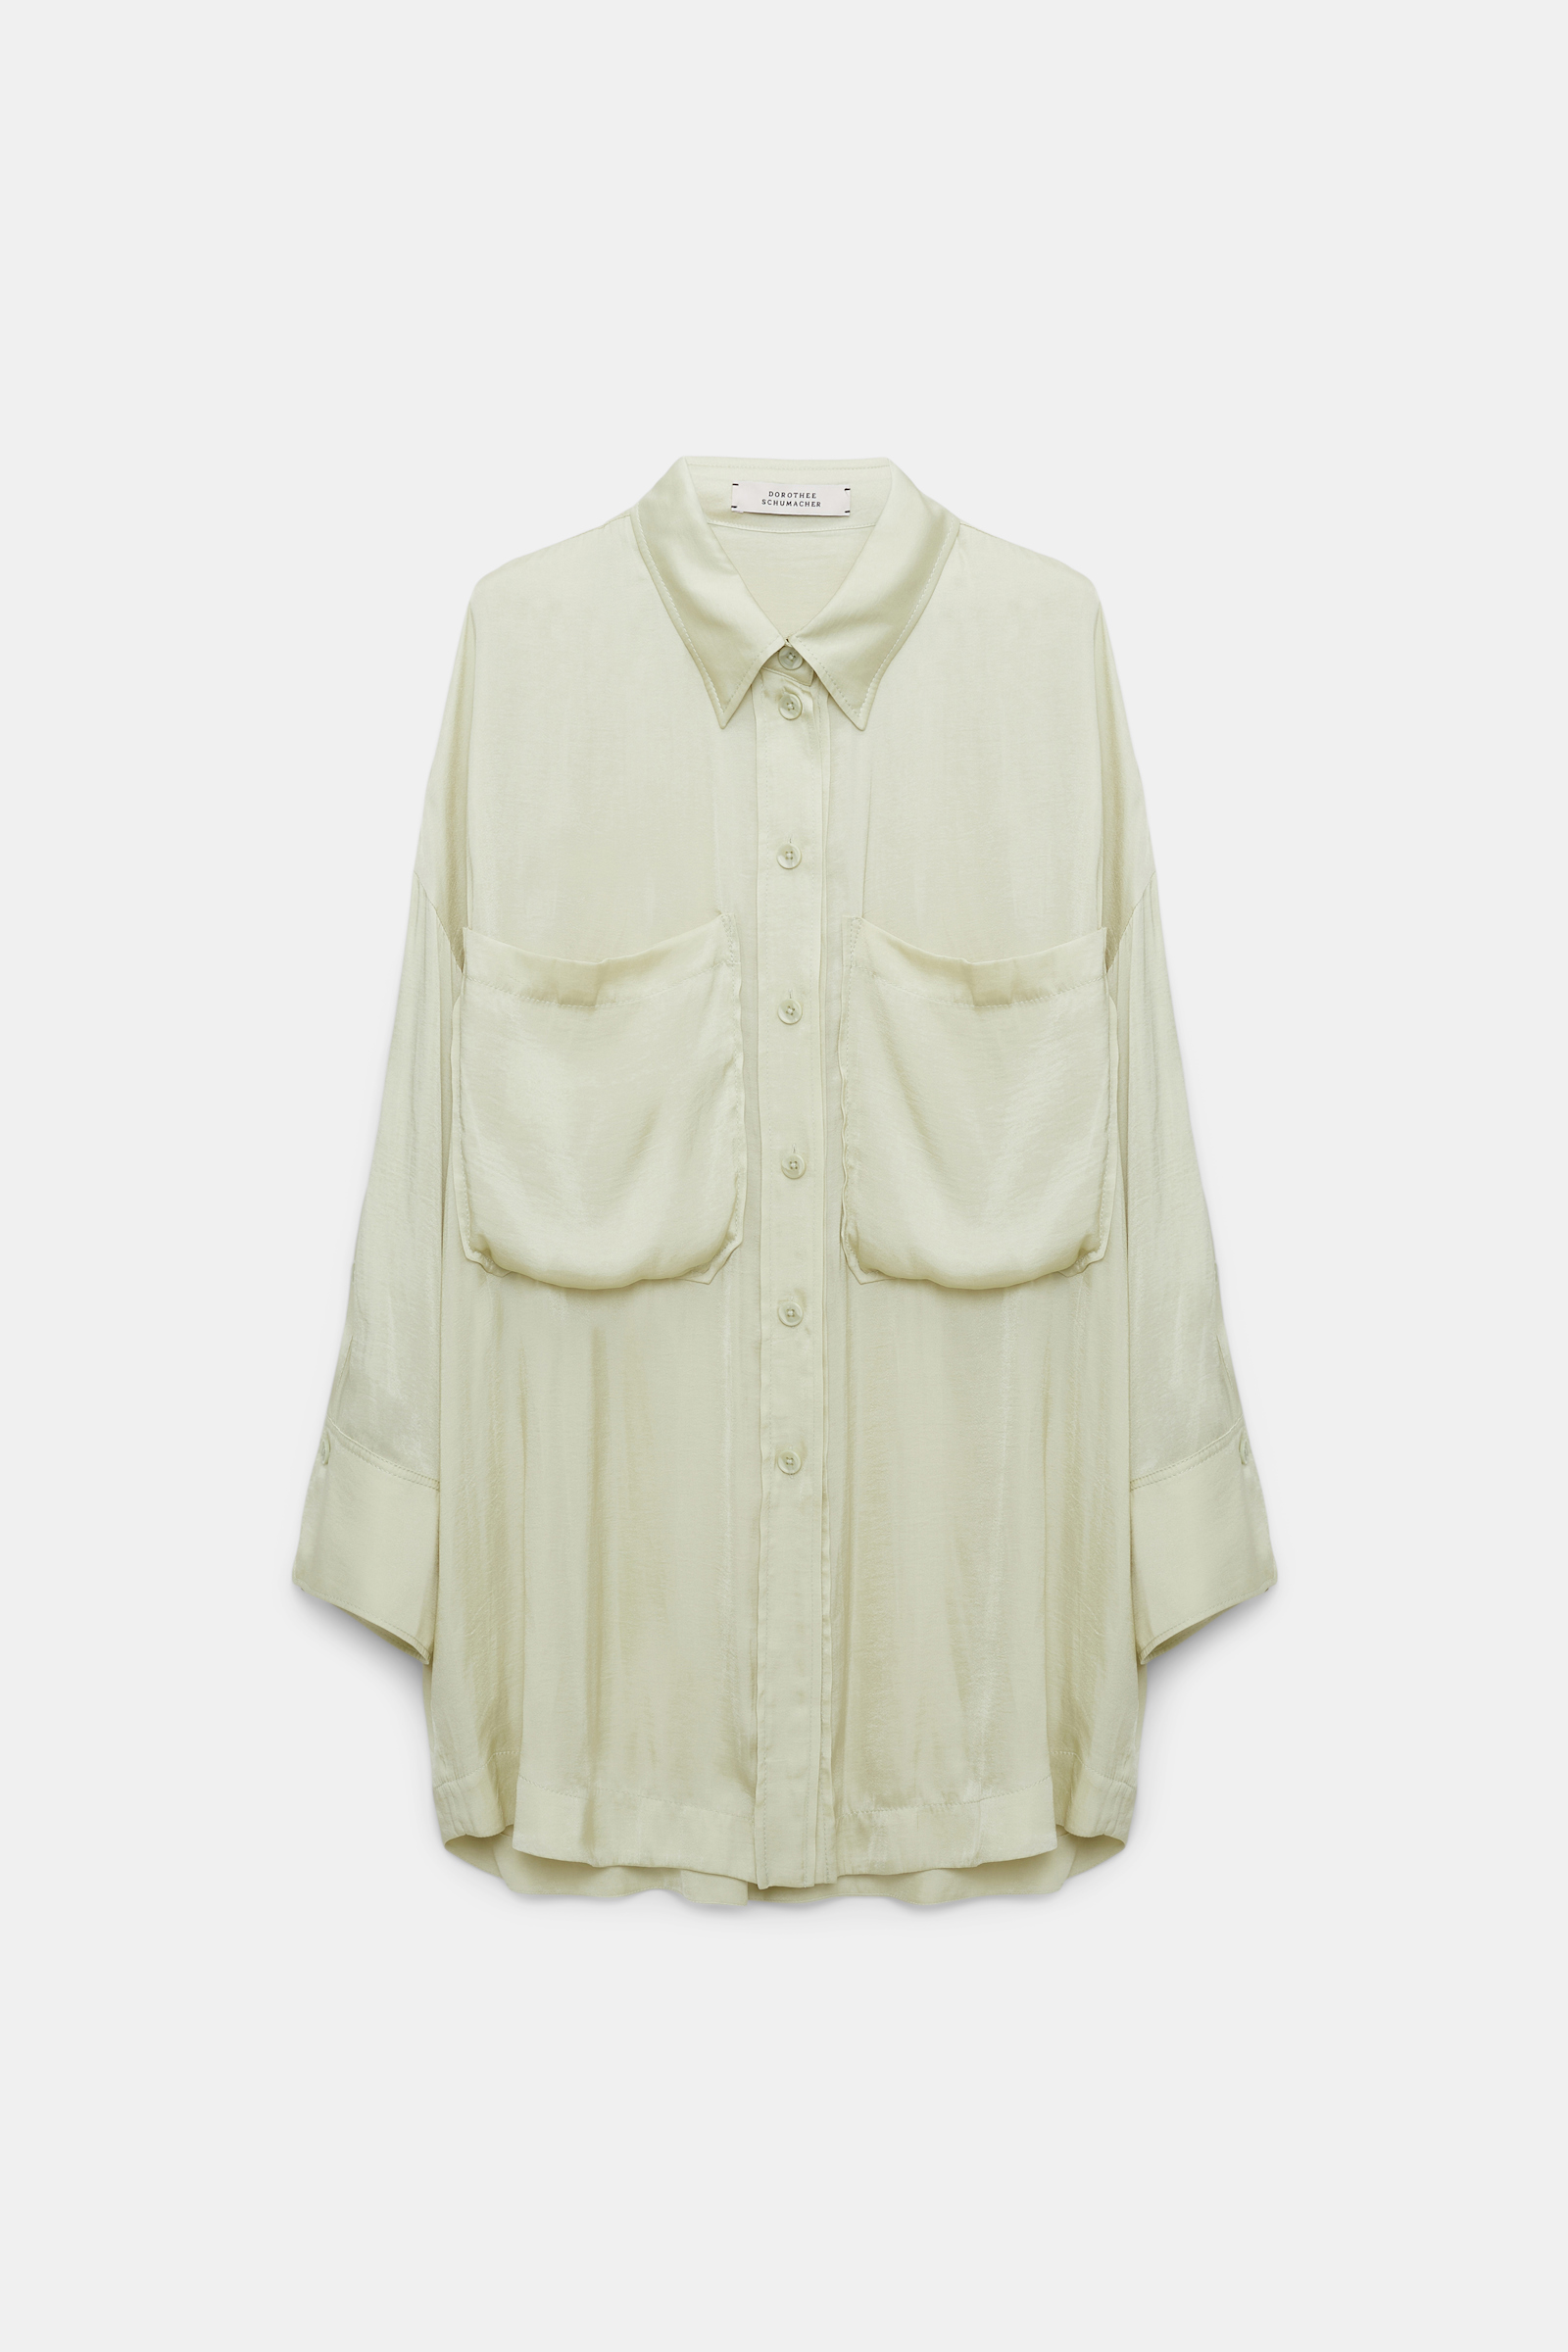 Dorothee Schumacher Oversized shirt in crinkle satin with patch pockets light lime